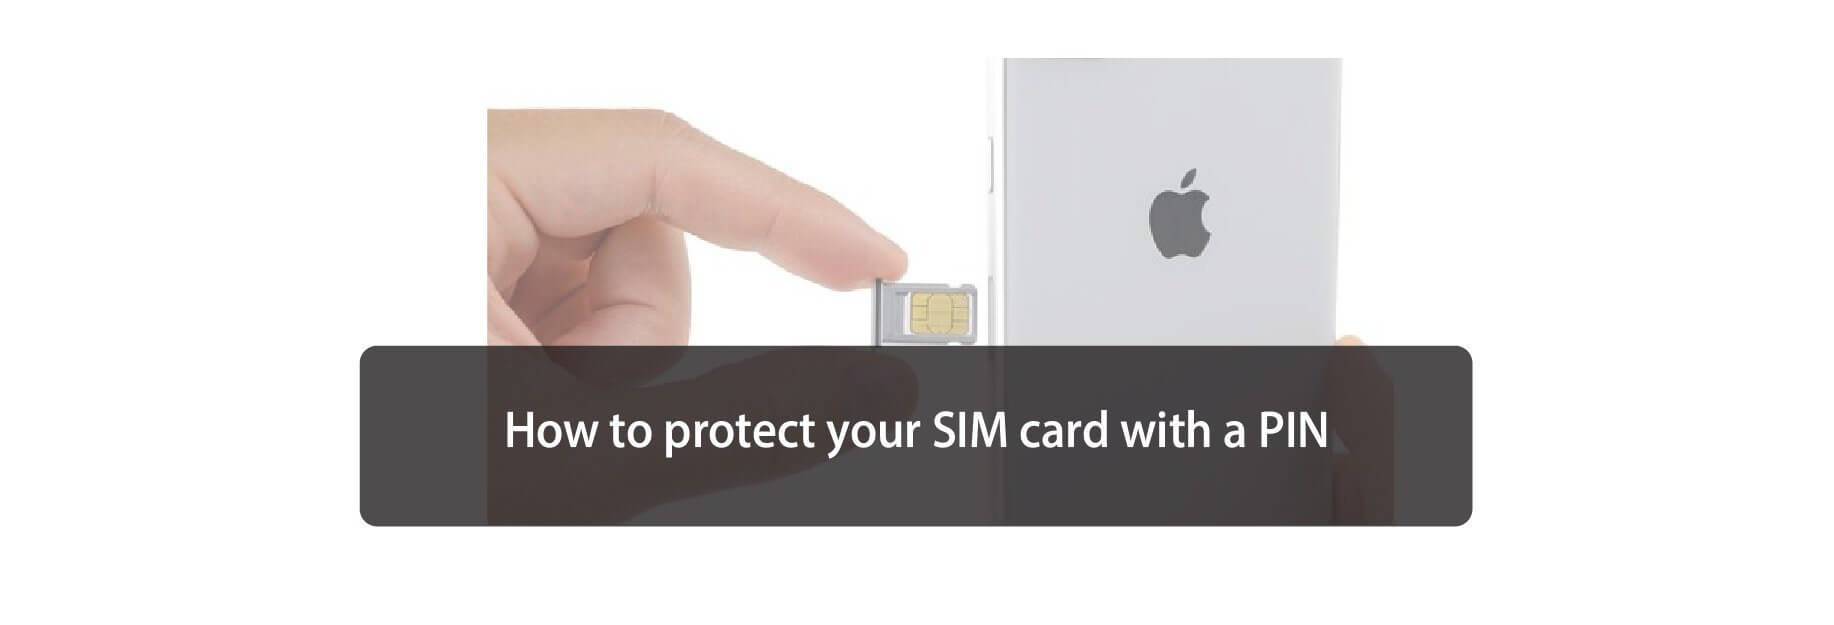 How to protect your SIM card with a PIN